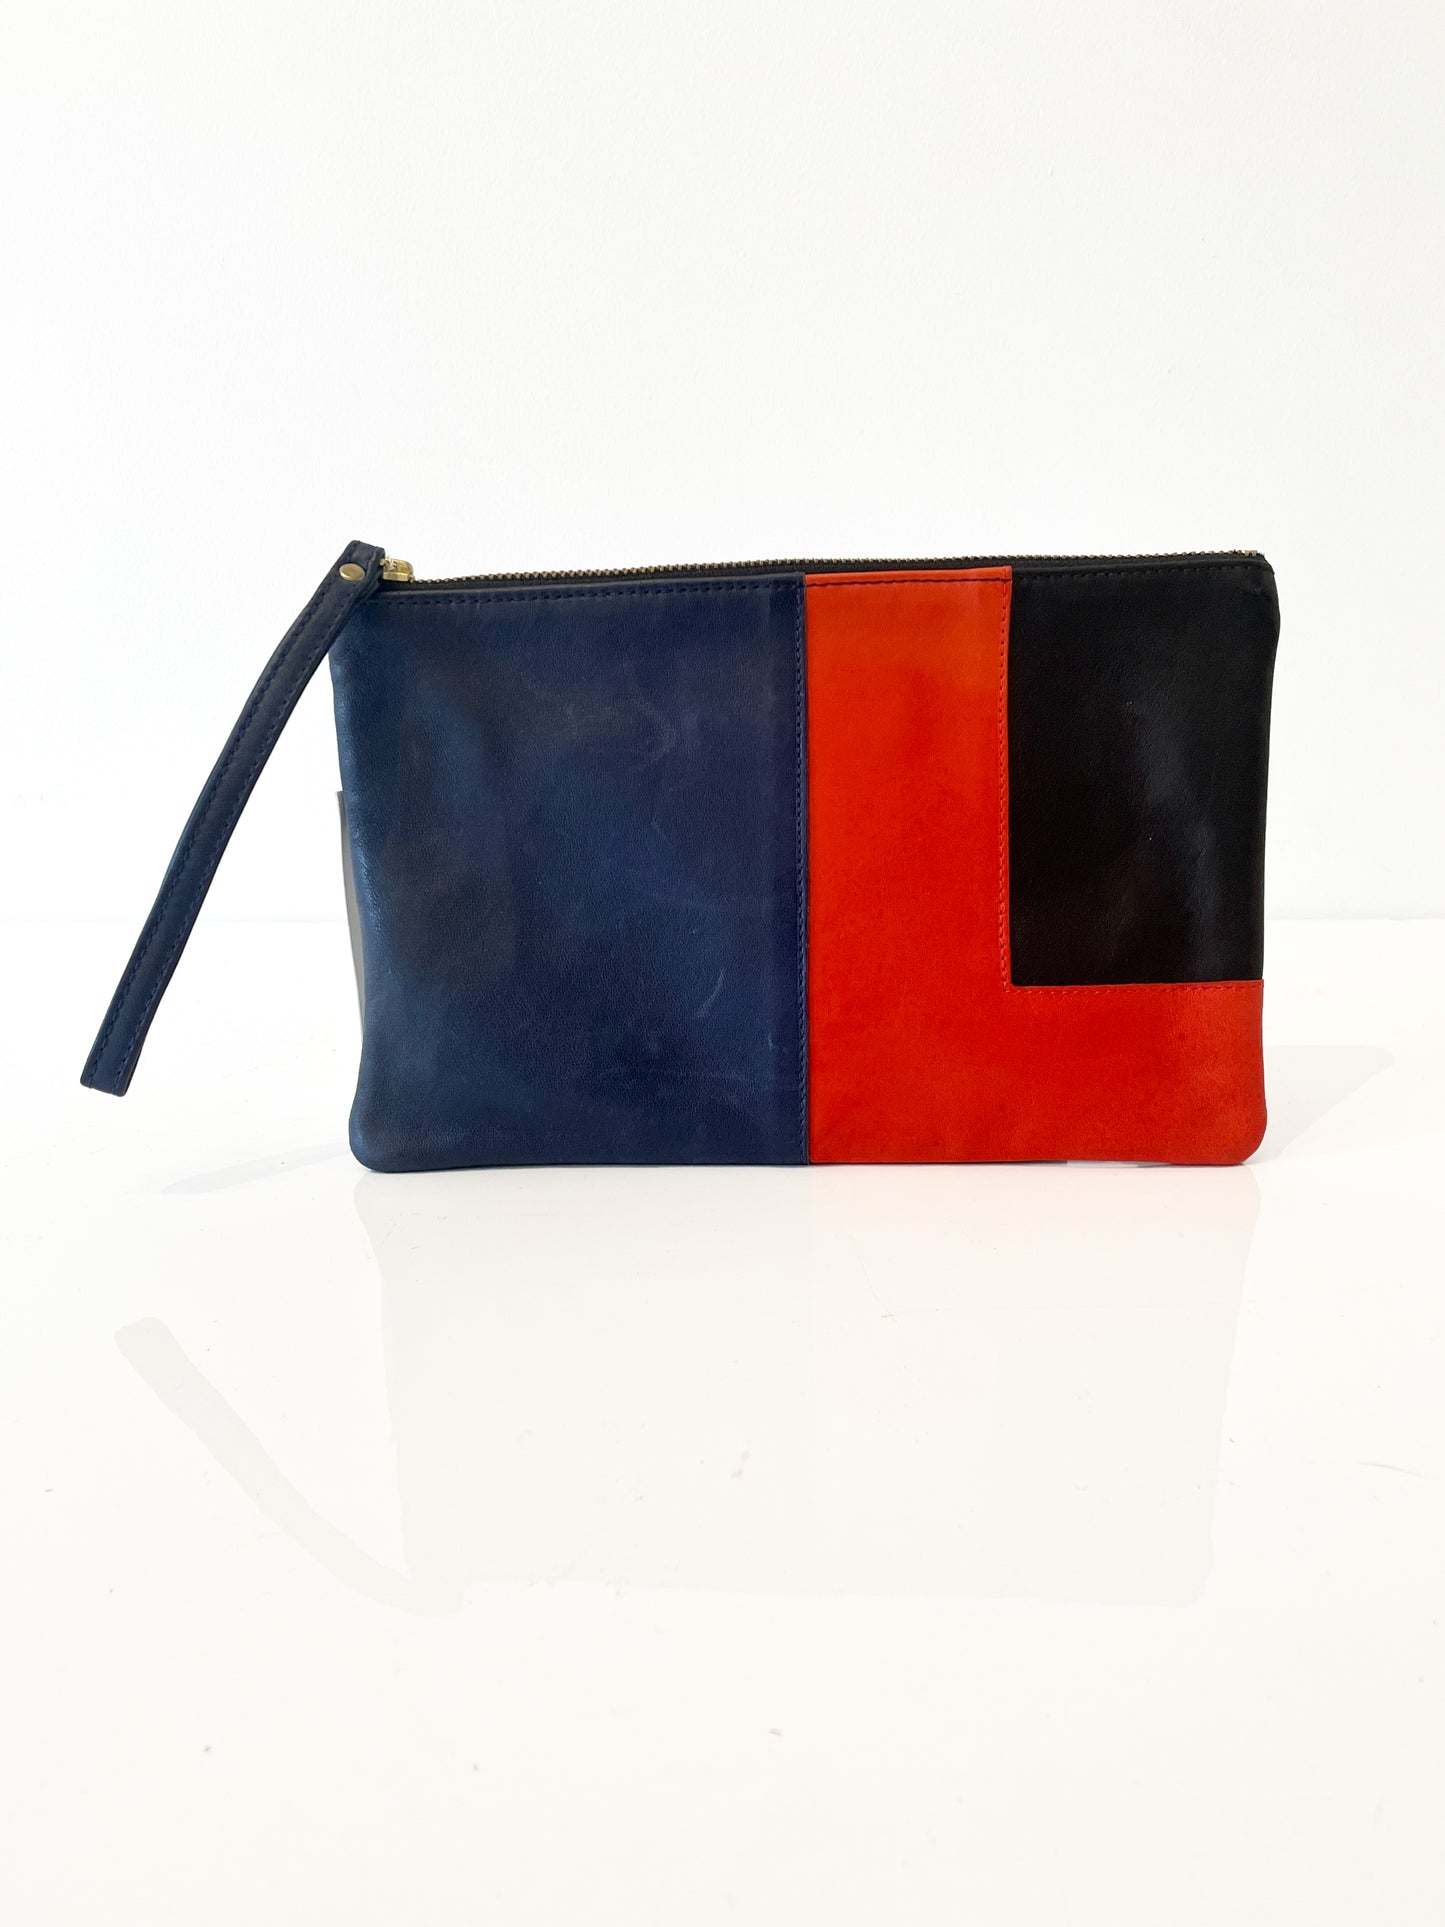 Navy and Red Leather Clutch